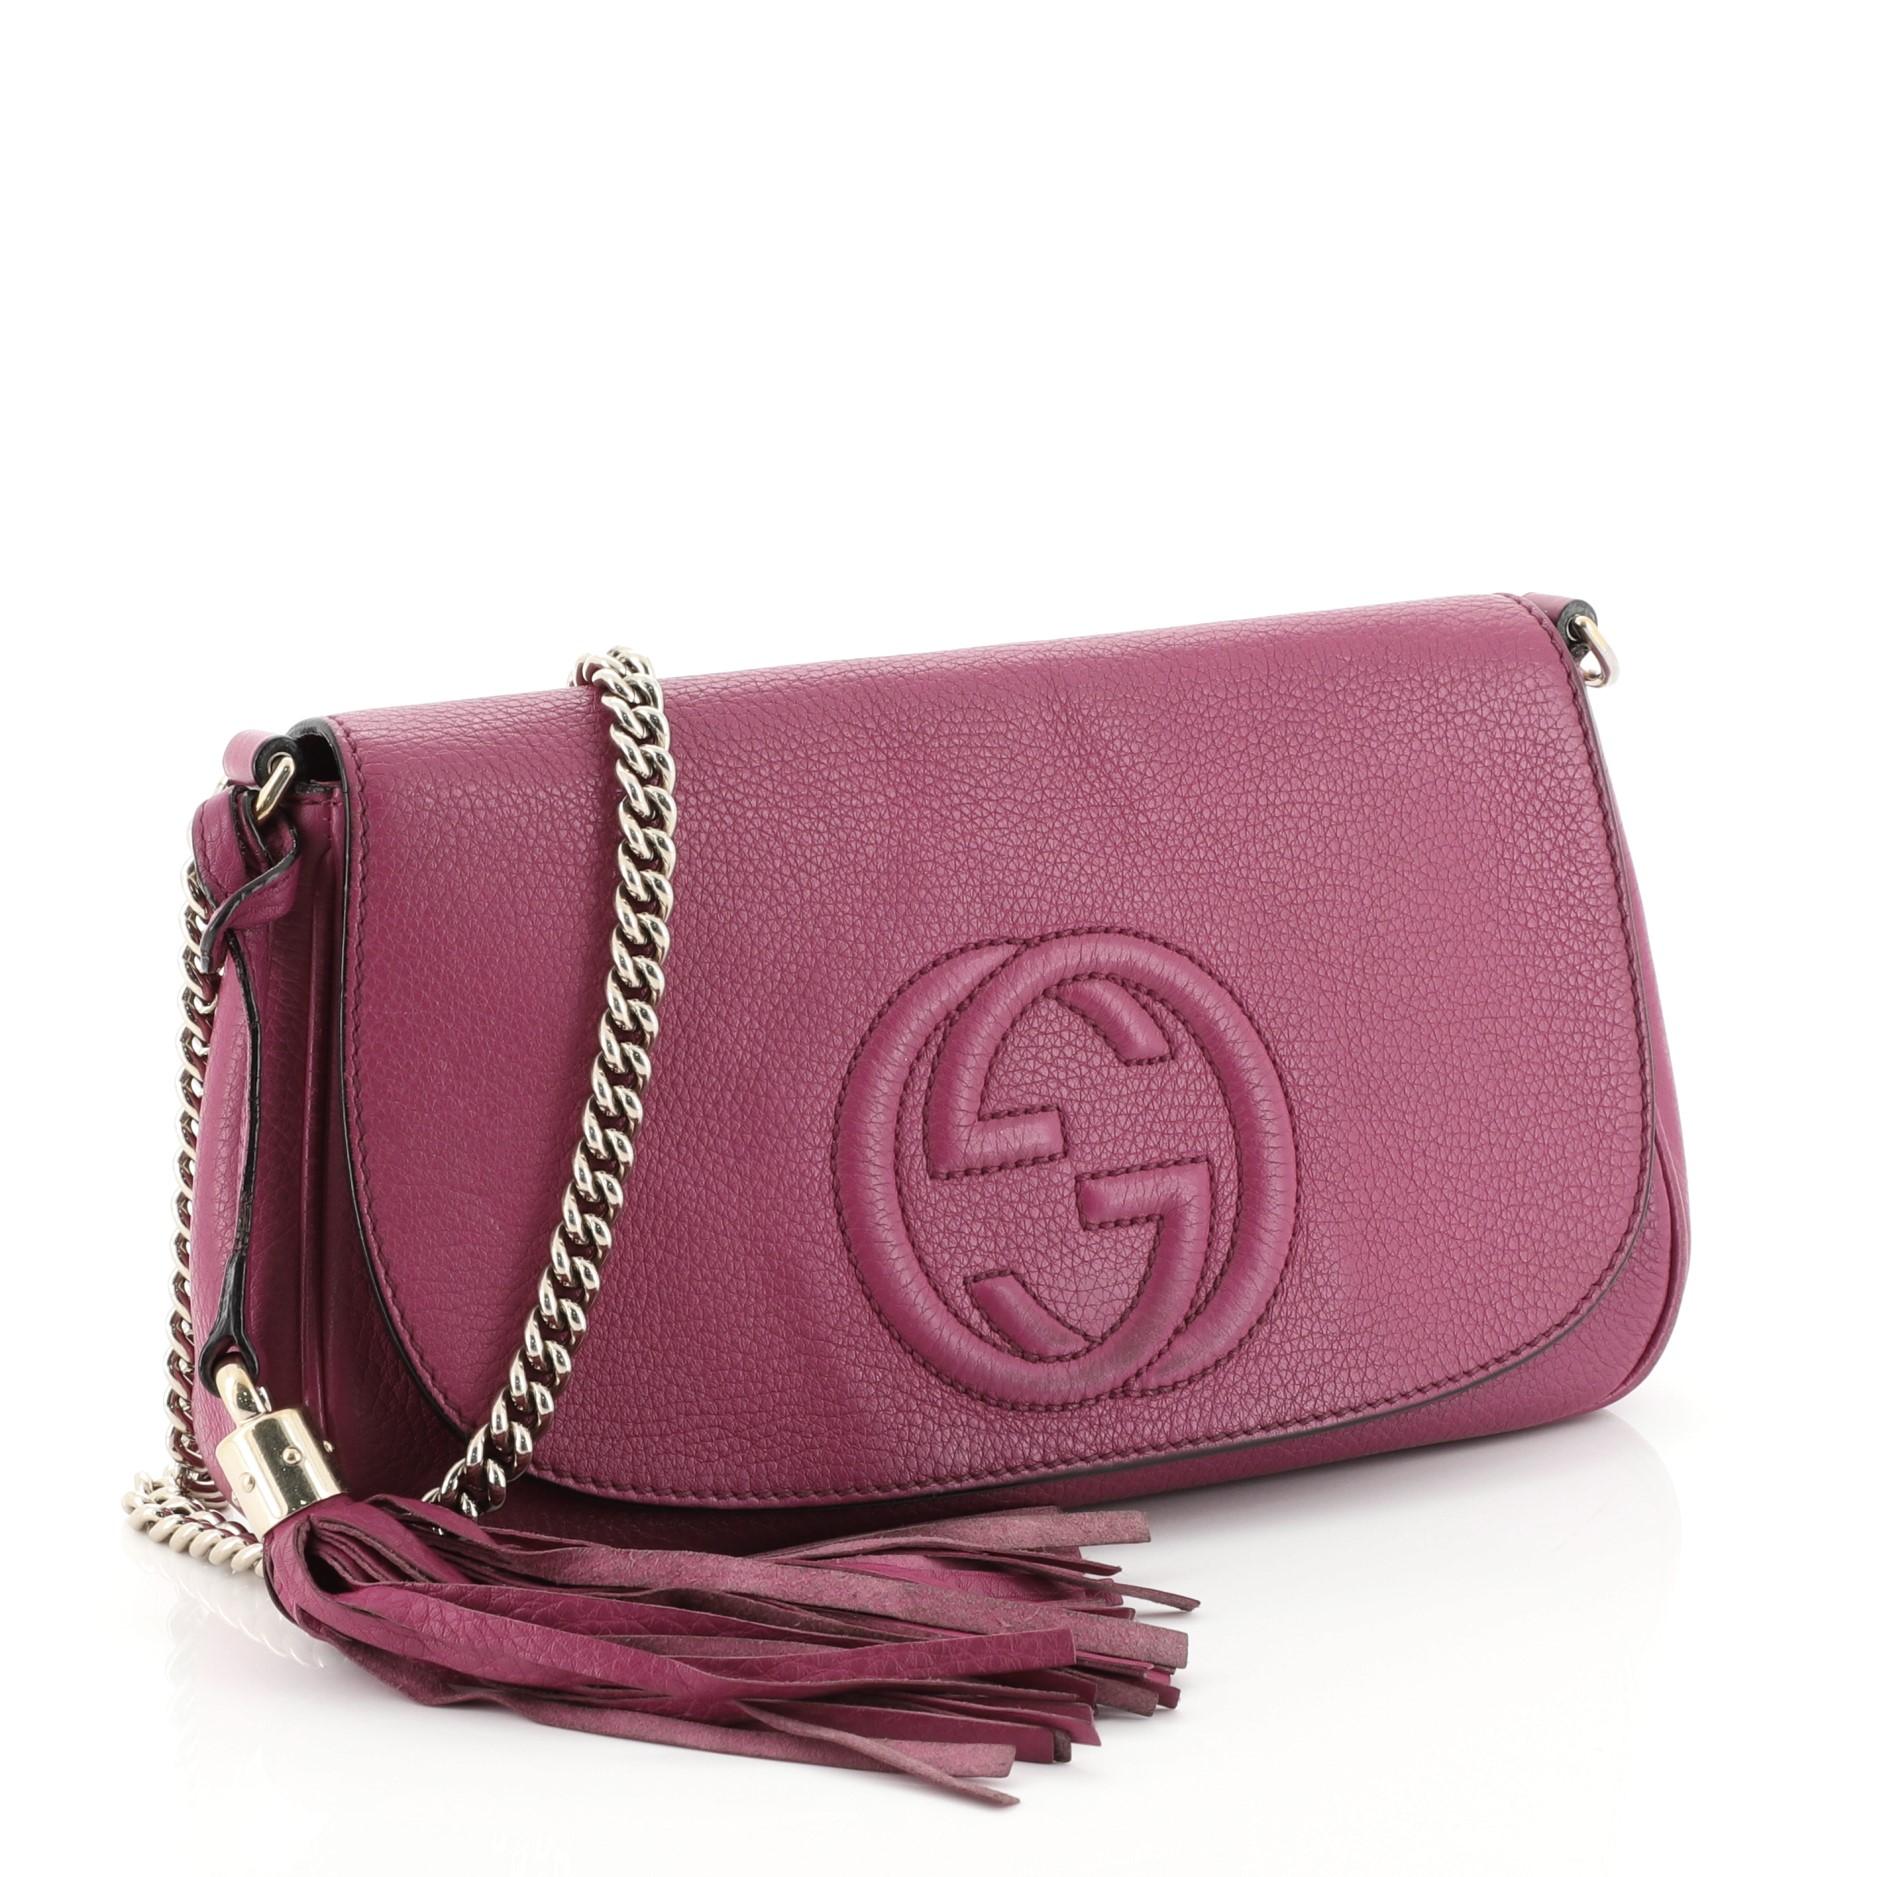 This Gucci Soho Chain Crossbody Bag Leather Medium, crafted from pink leather, features a long chain strap, stitched interlocking GG logo on its flap, and gold-tone hardware. Its hidden magnetic snap closure opens to a neutral fabric interior with